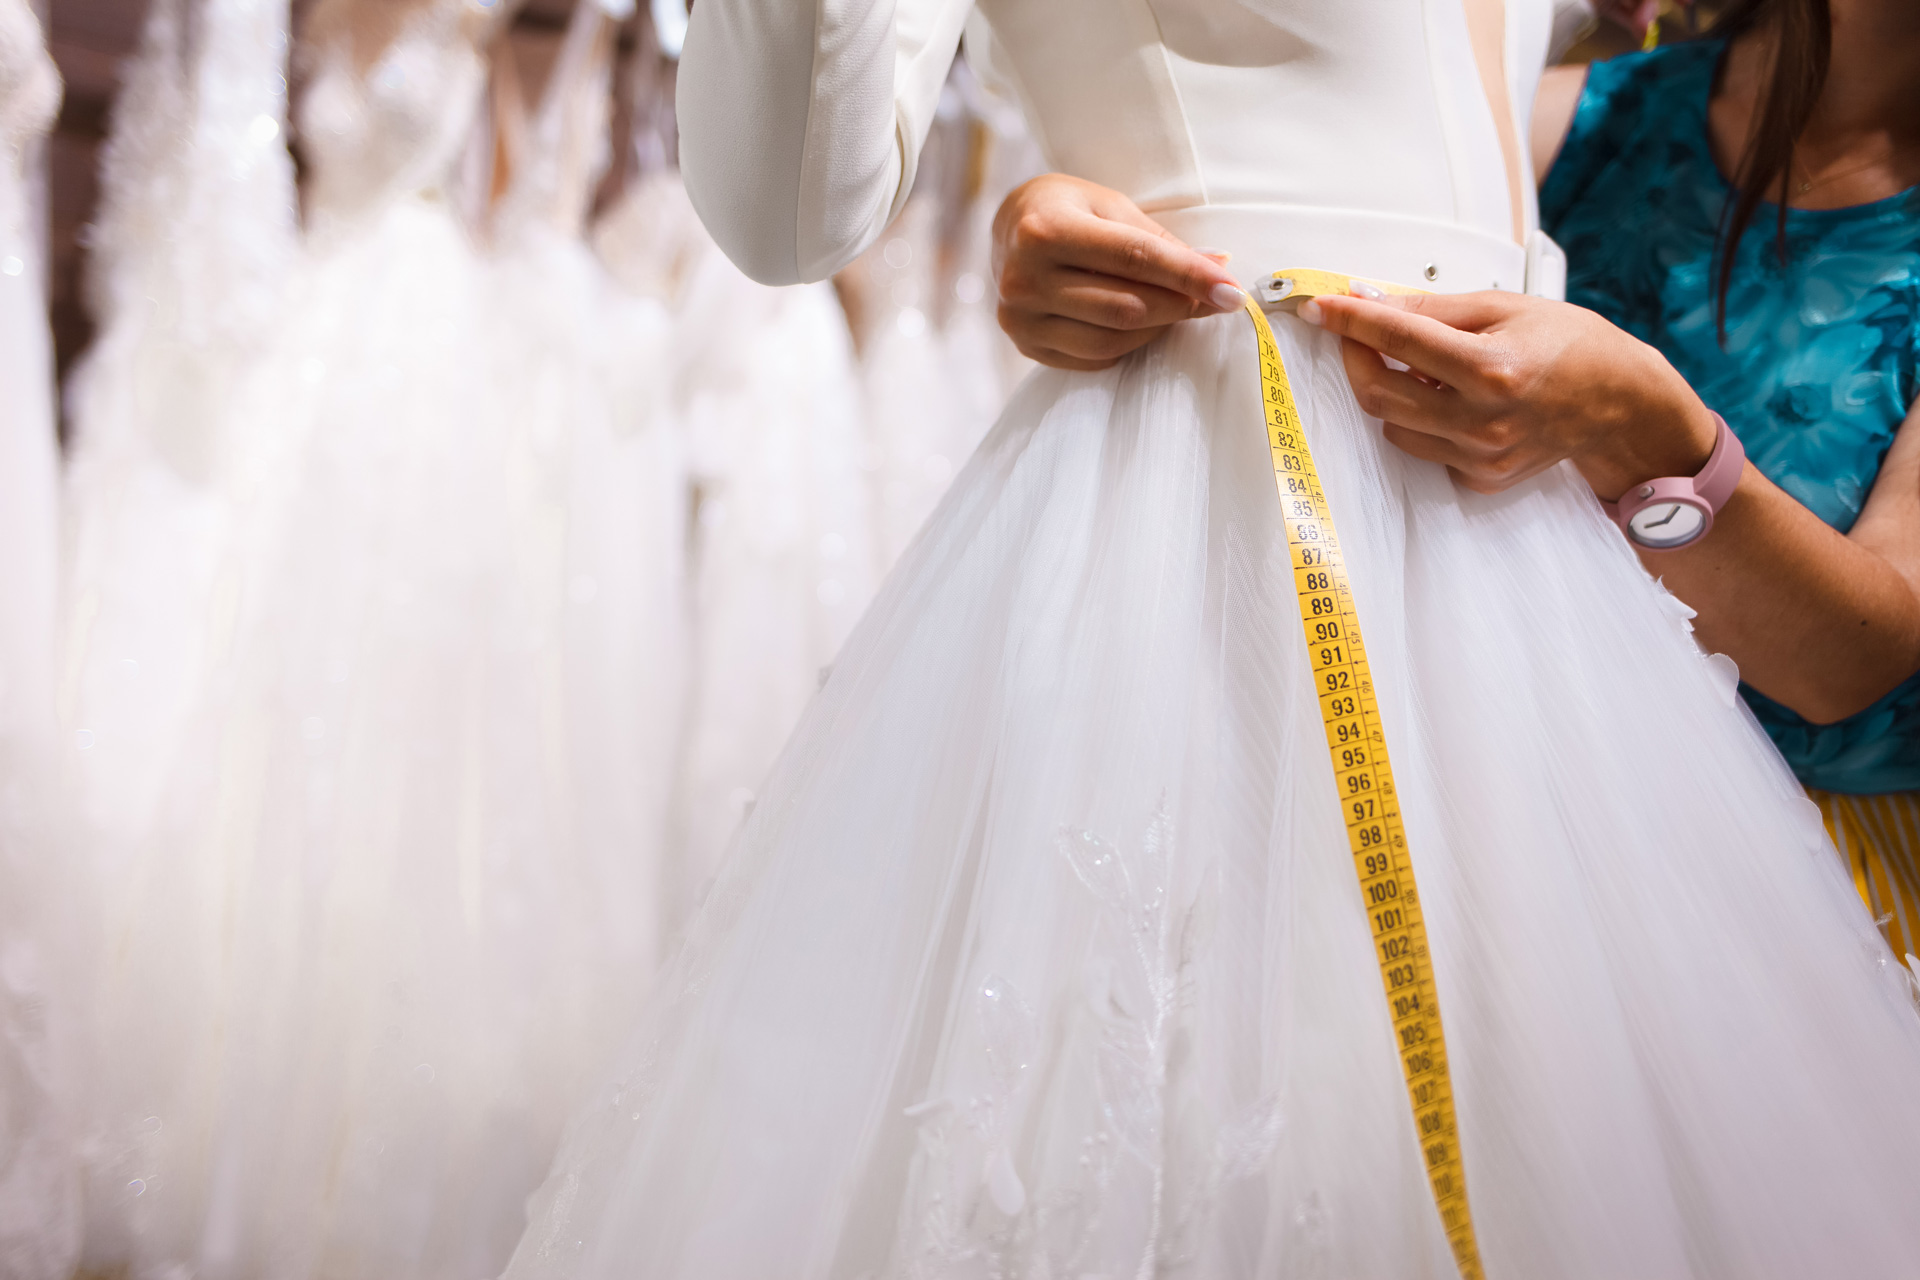 consultant of the salon of wedding dresses takes m 2022 02 01 01 30 22 utc How many sizes can you alter a wedding dress?